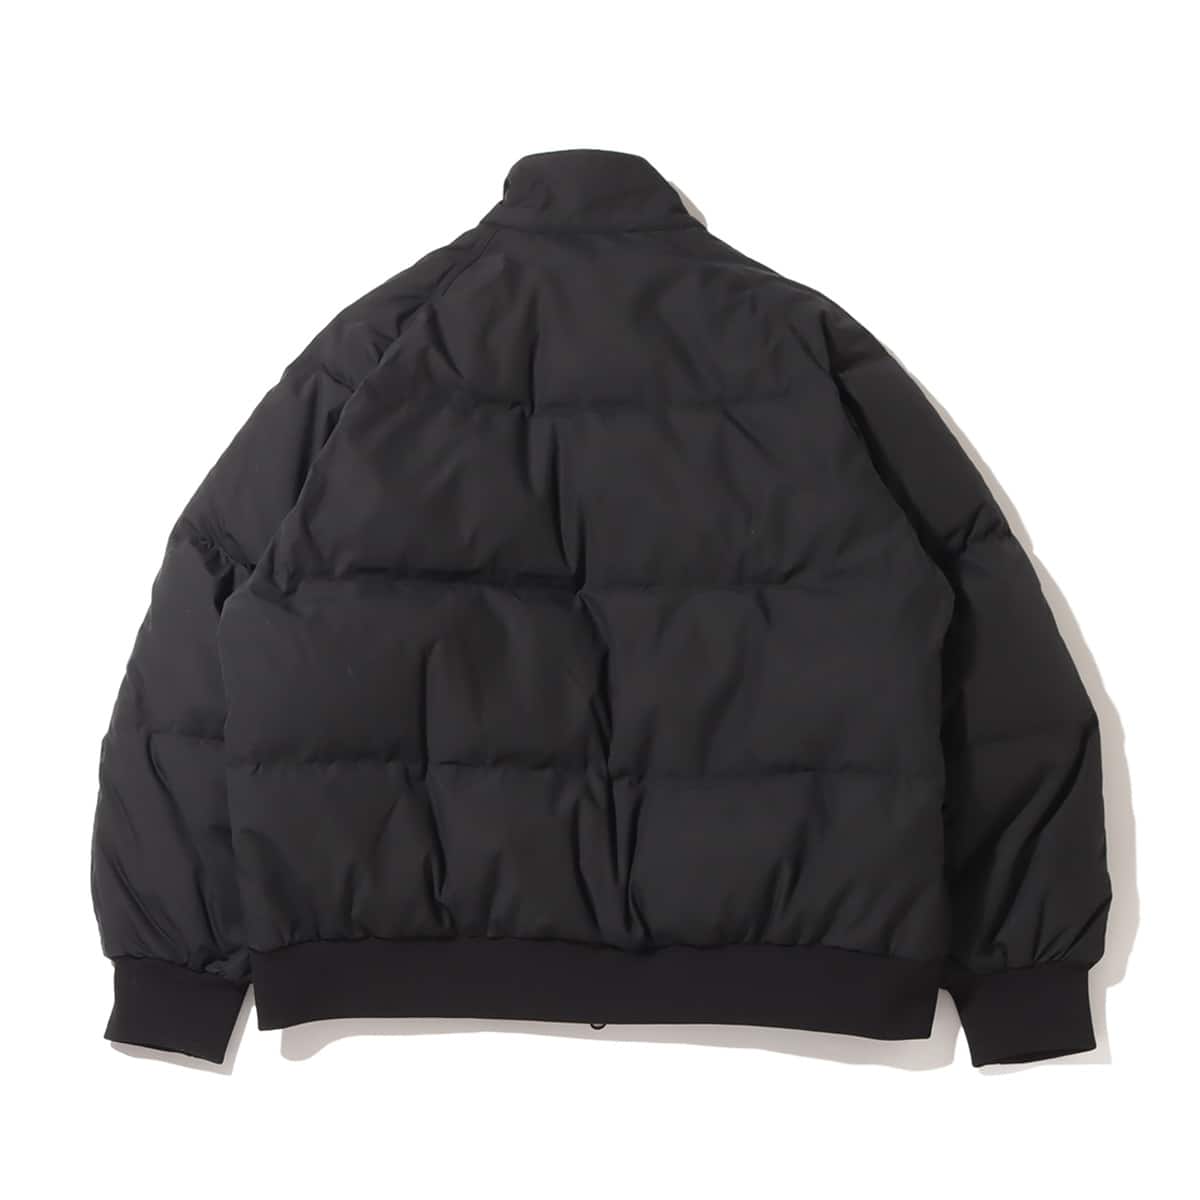 THE NORTH FACE PURPLE LABEL 65/35 Field Down Jacket Black 